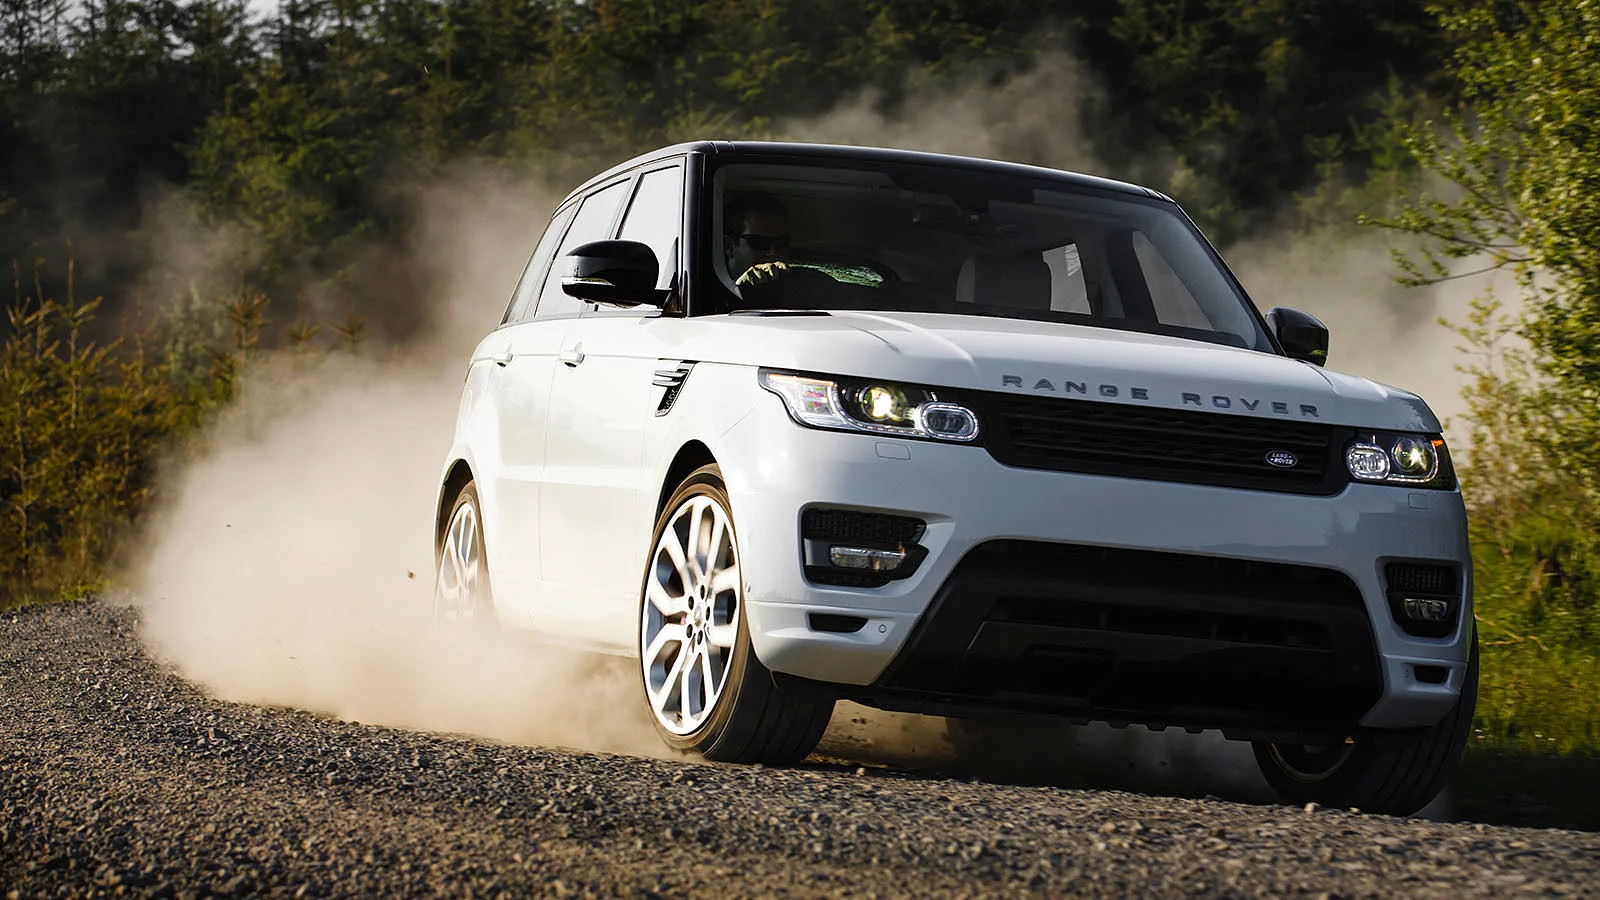 READY TO GET THE LAND ROVER FEELING?